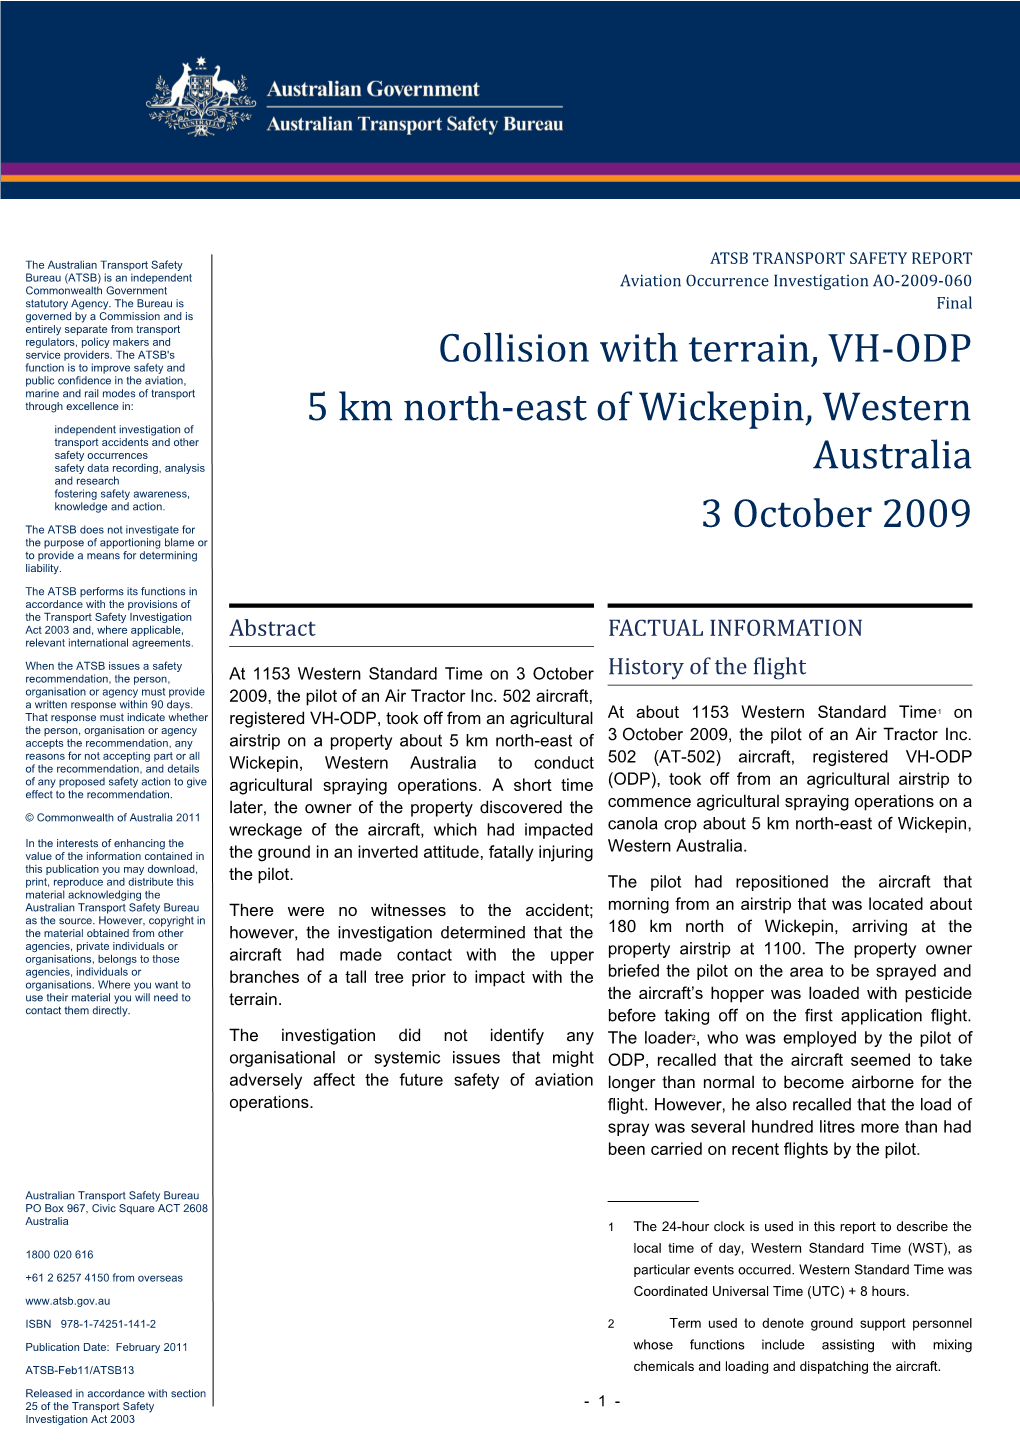 Collision with Terrain, VH-ODP 5 Km North-East of Wickepin, Western Australia 3 October 2009